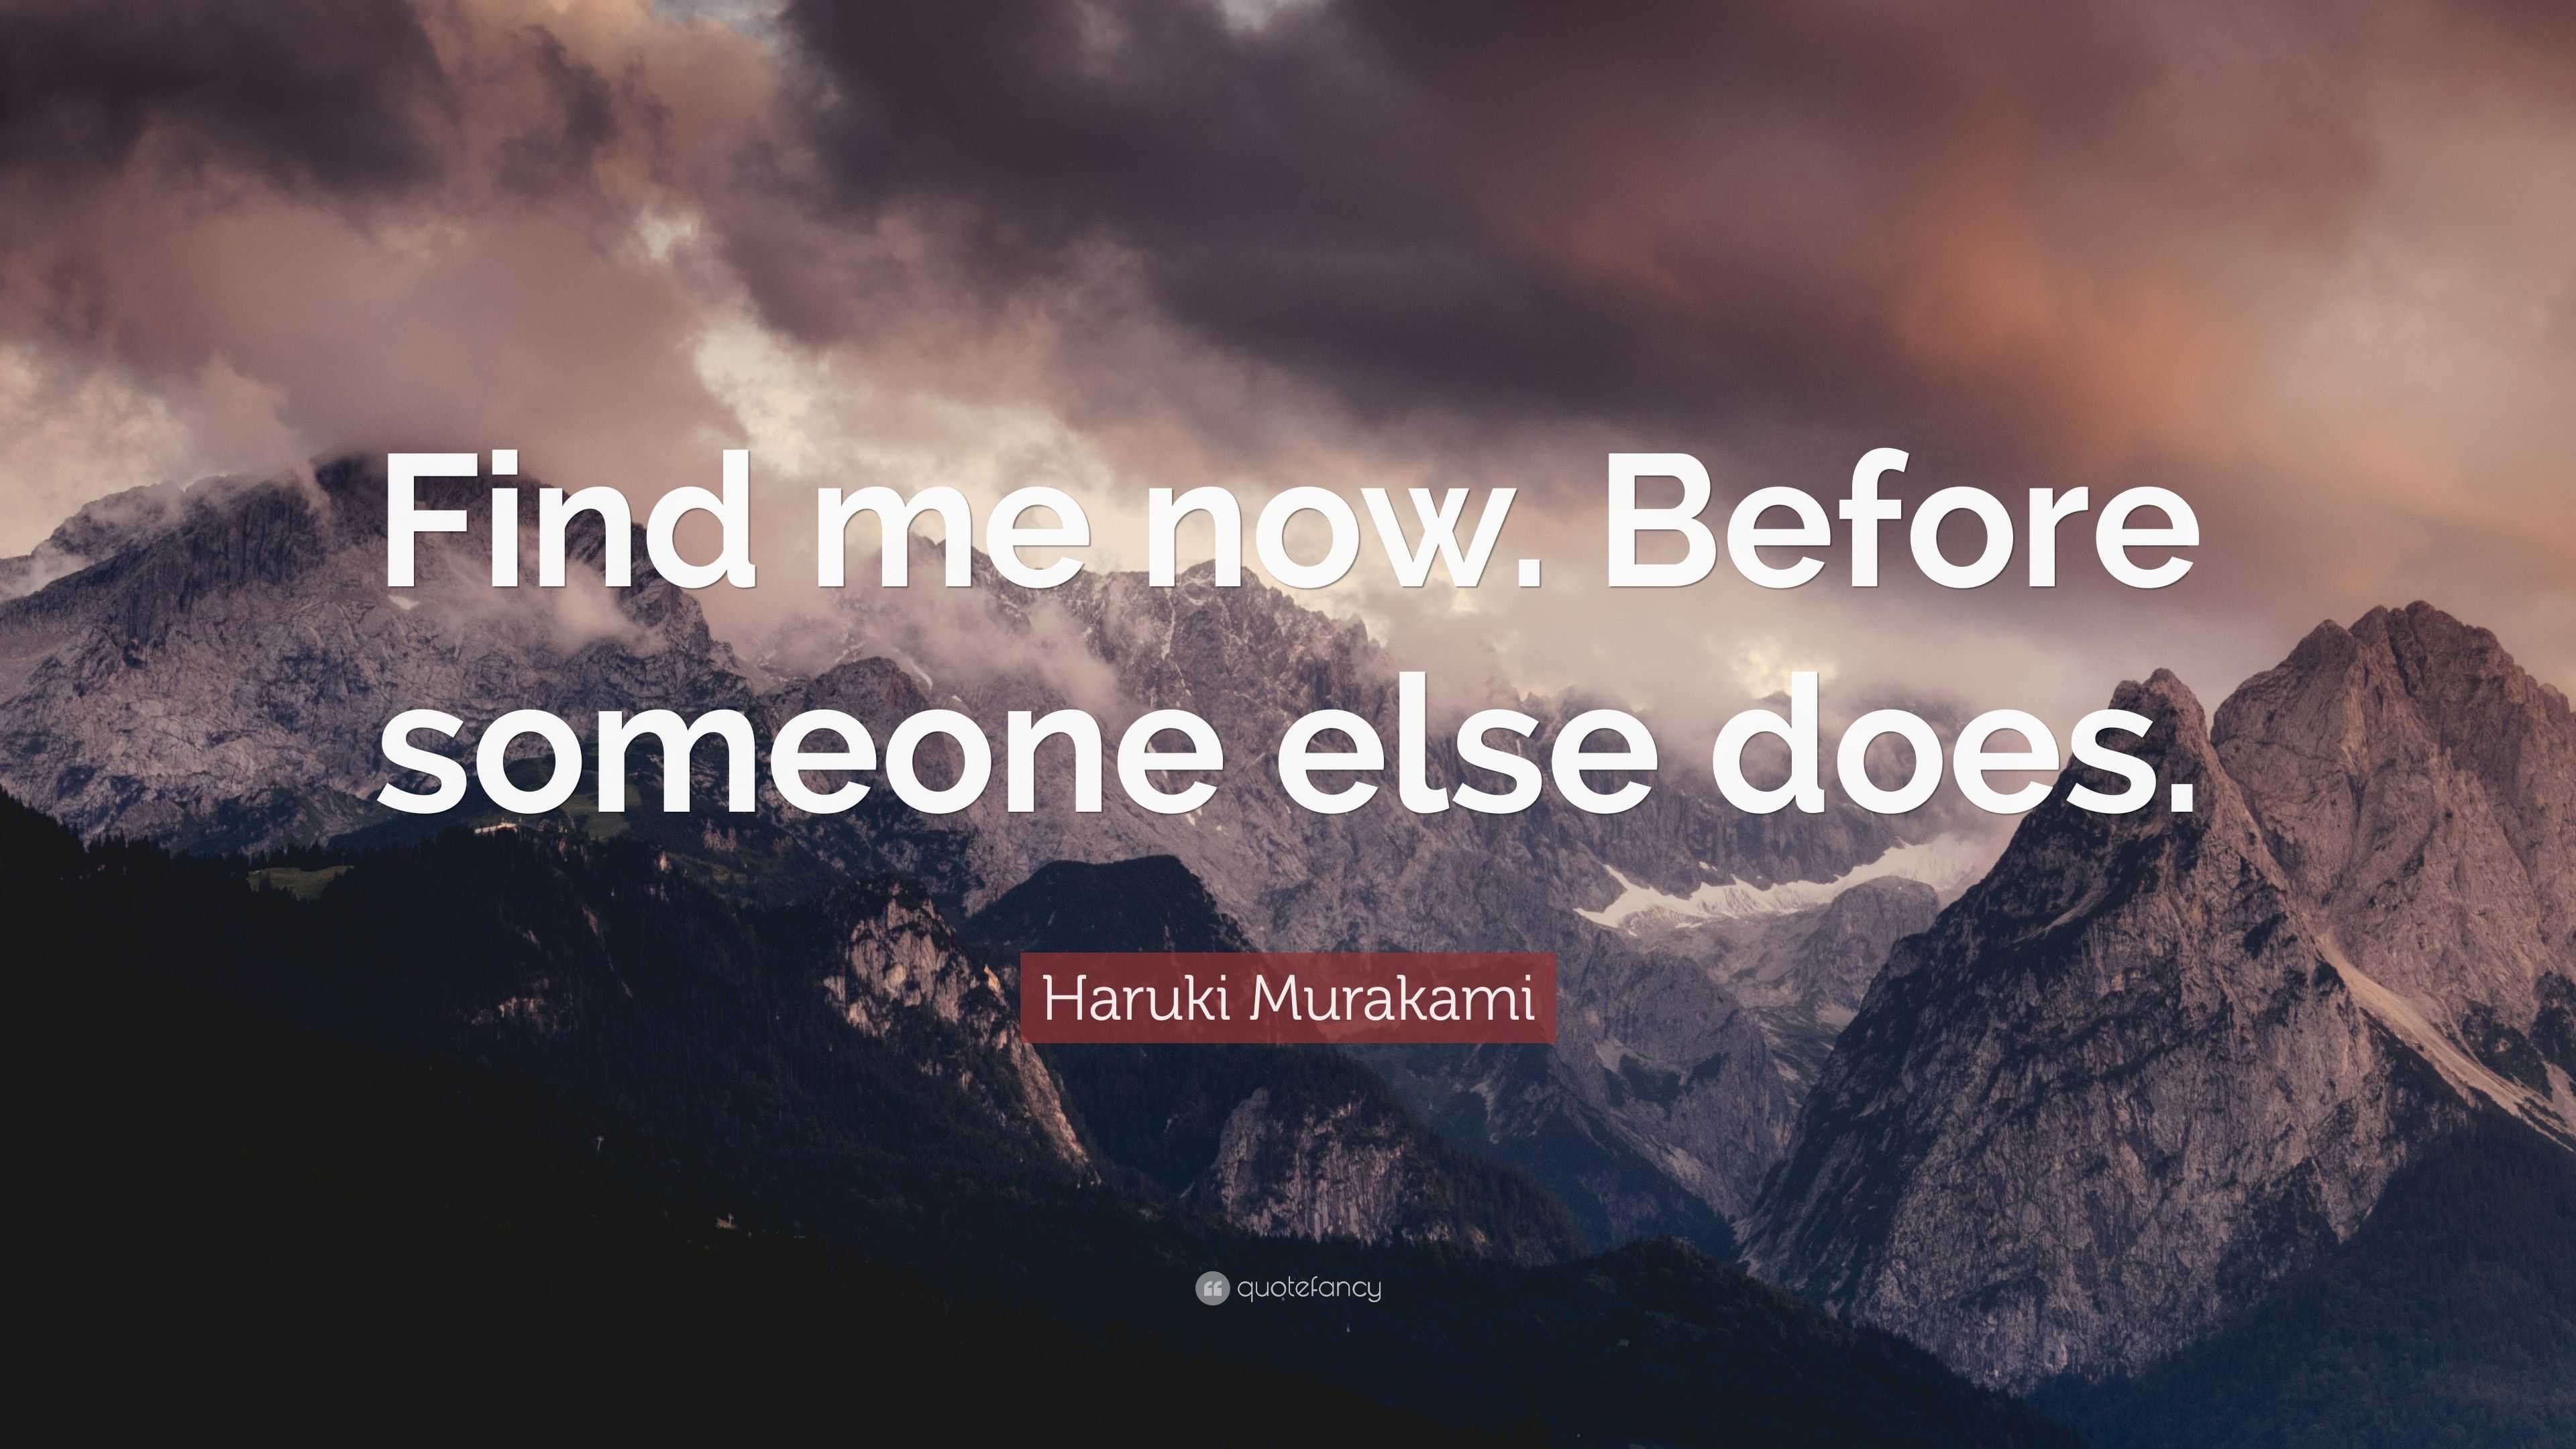 Haruki Murakami Quote: “Find me now. Before someone else does.”